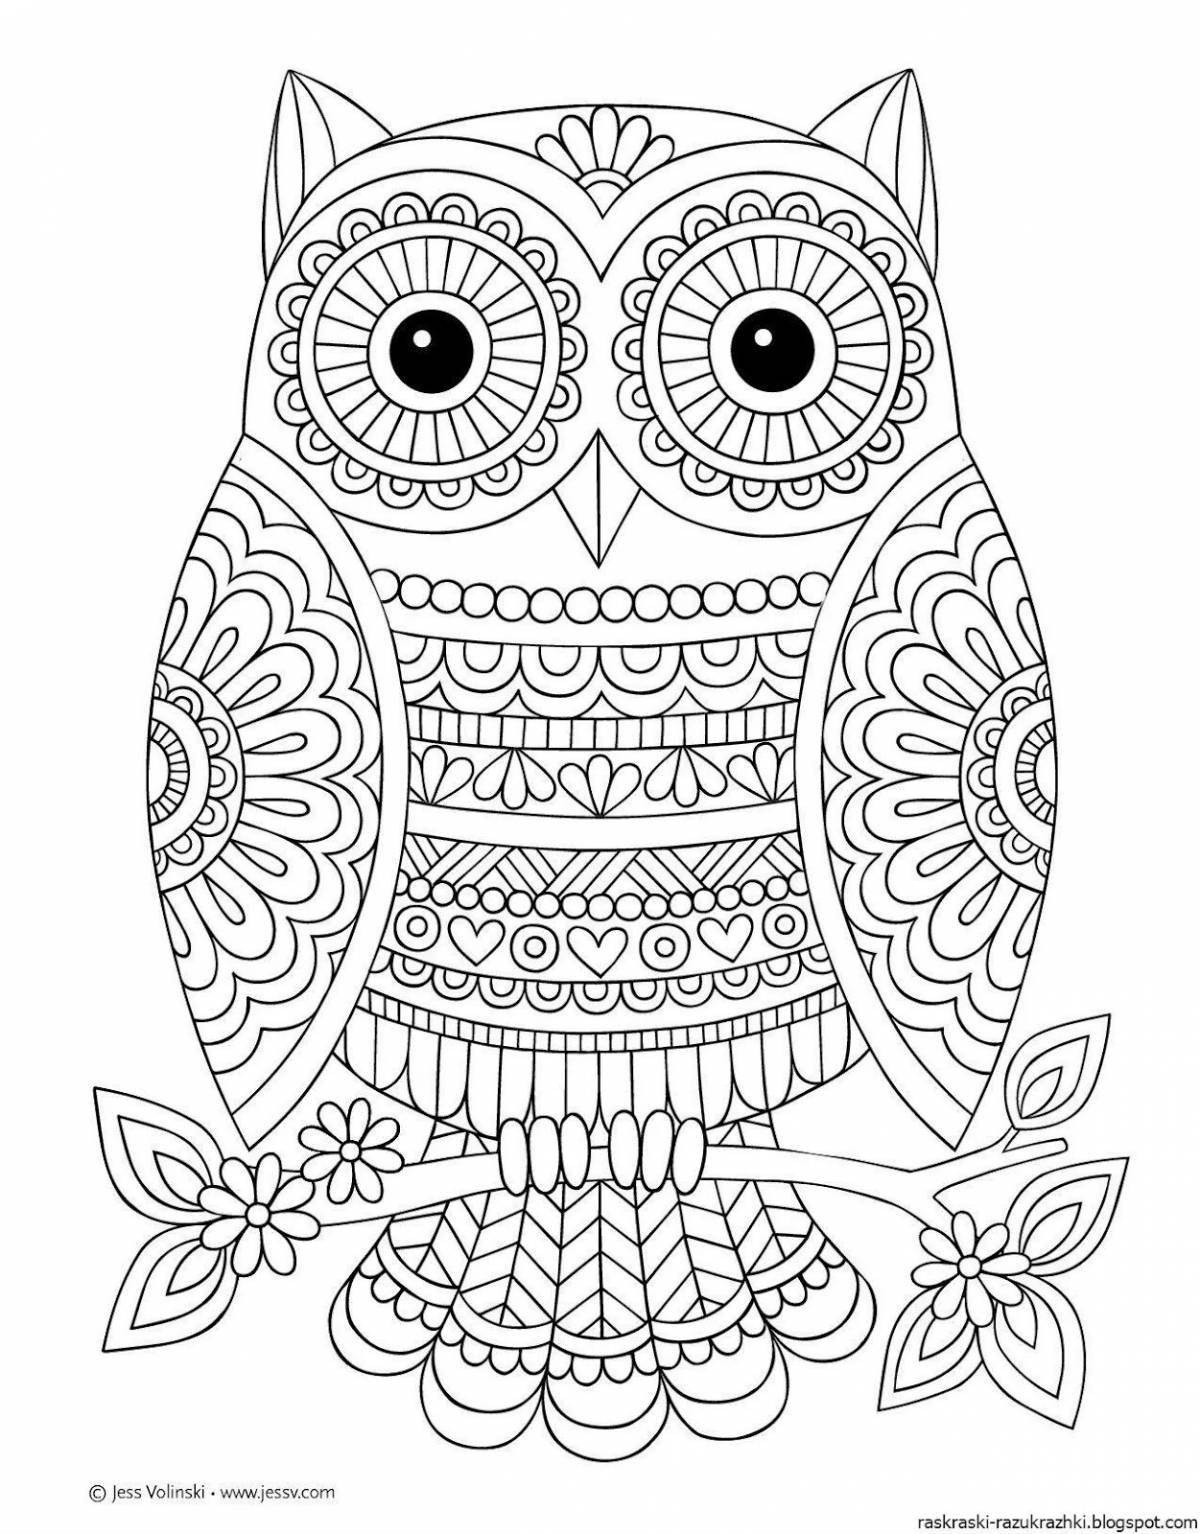 Adorable anti-stress coloring book for 4-5 year olds